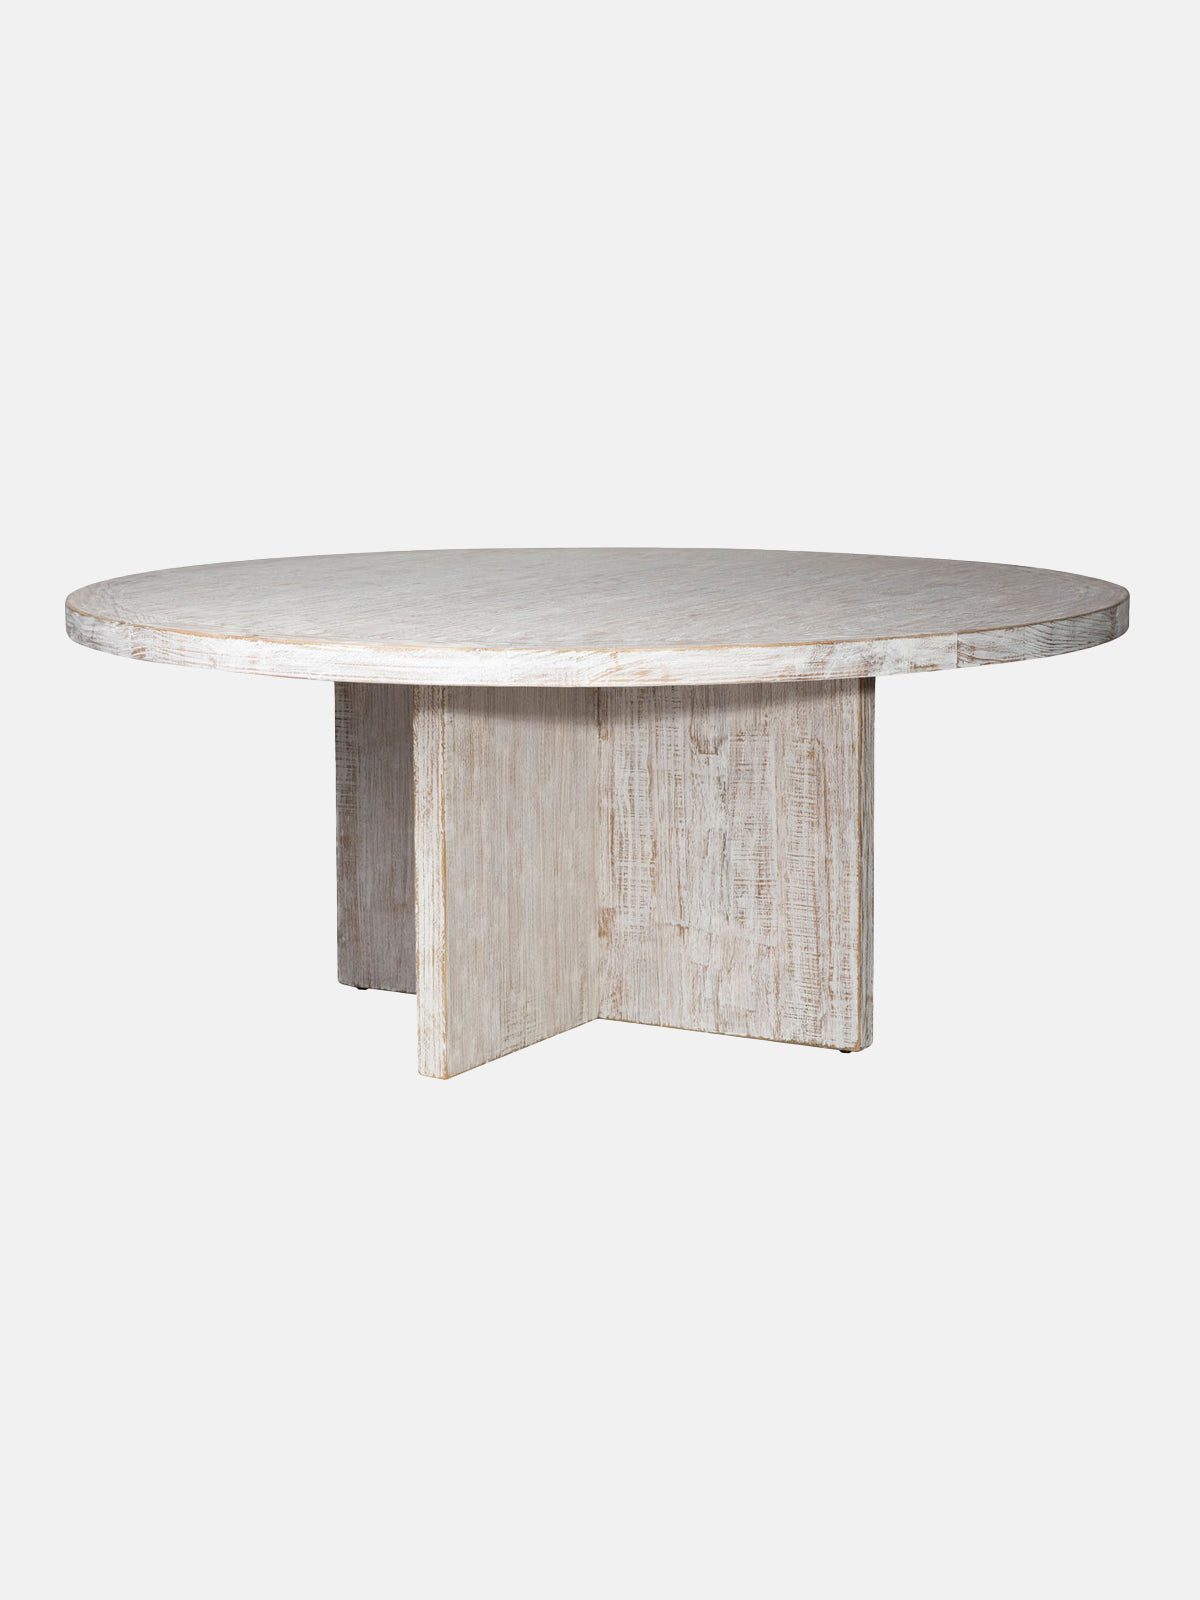 White Harley Dining Table